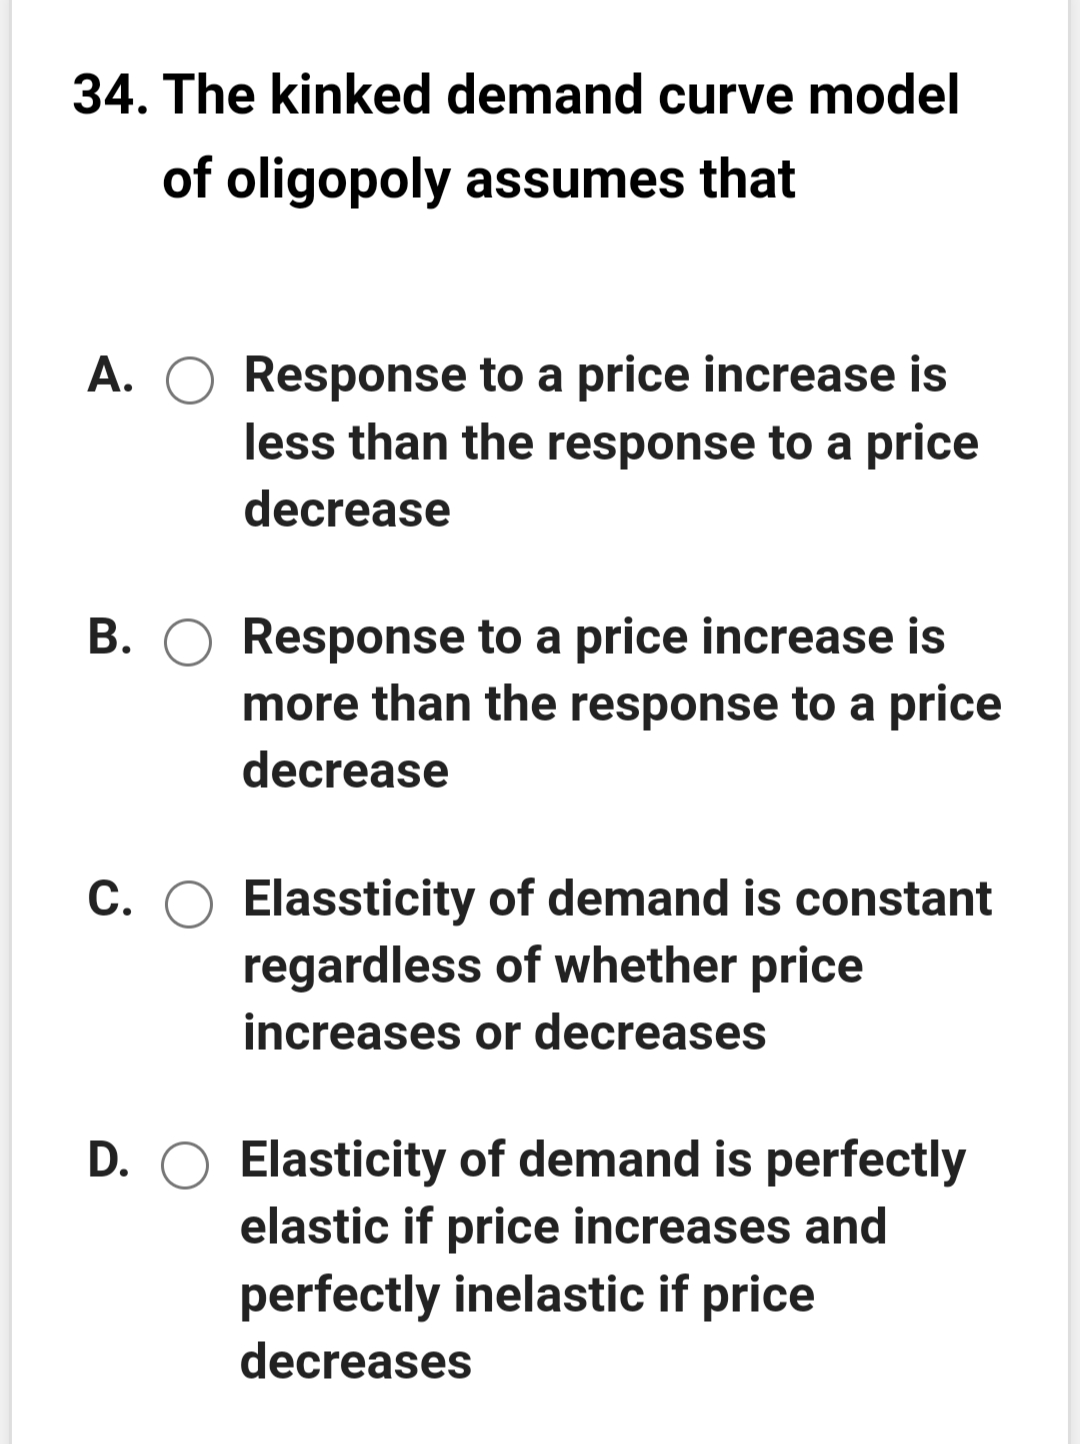 34. The kinked demand curve model
of oligopoly assumes that
A. O Response to a price increase is
less than the response to a price
decrease
B. O Response to a price increase is
more than the response to a price
decrease
C. O Elassticity of demand is constant
regardless of whether price
increases or decreases
D. O Elasticity of demand is perfectly
elastic if price increases and
perfectly inelastic if price
decreases
